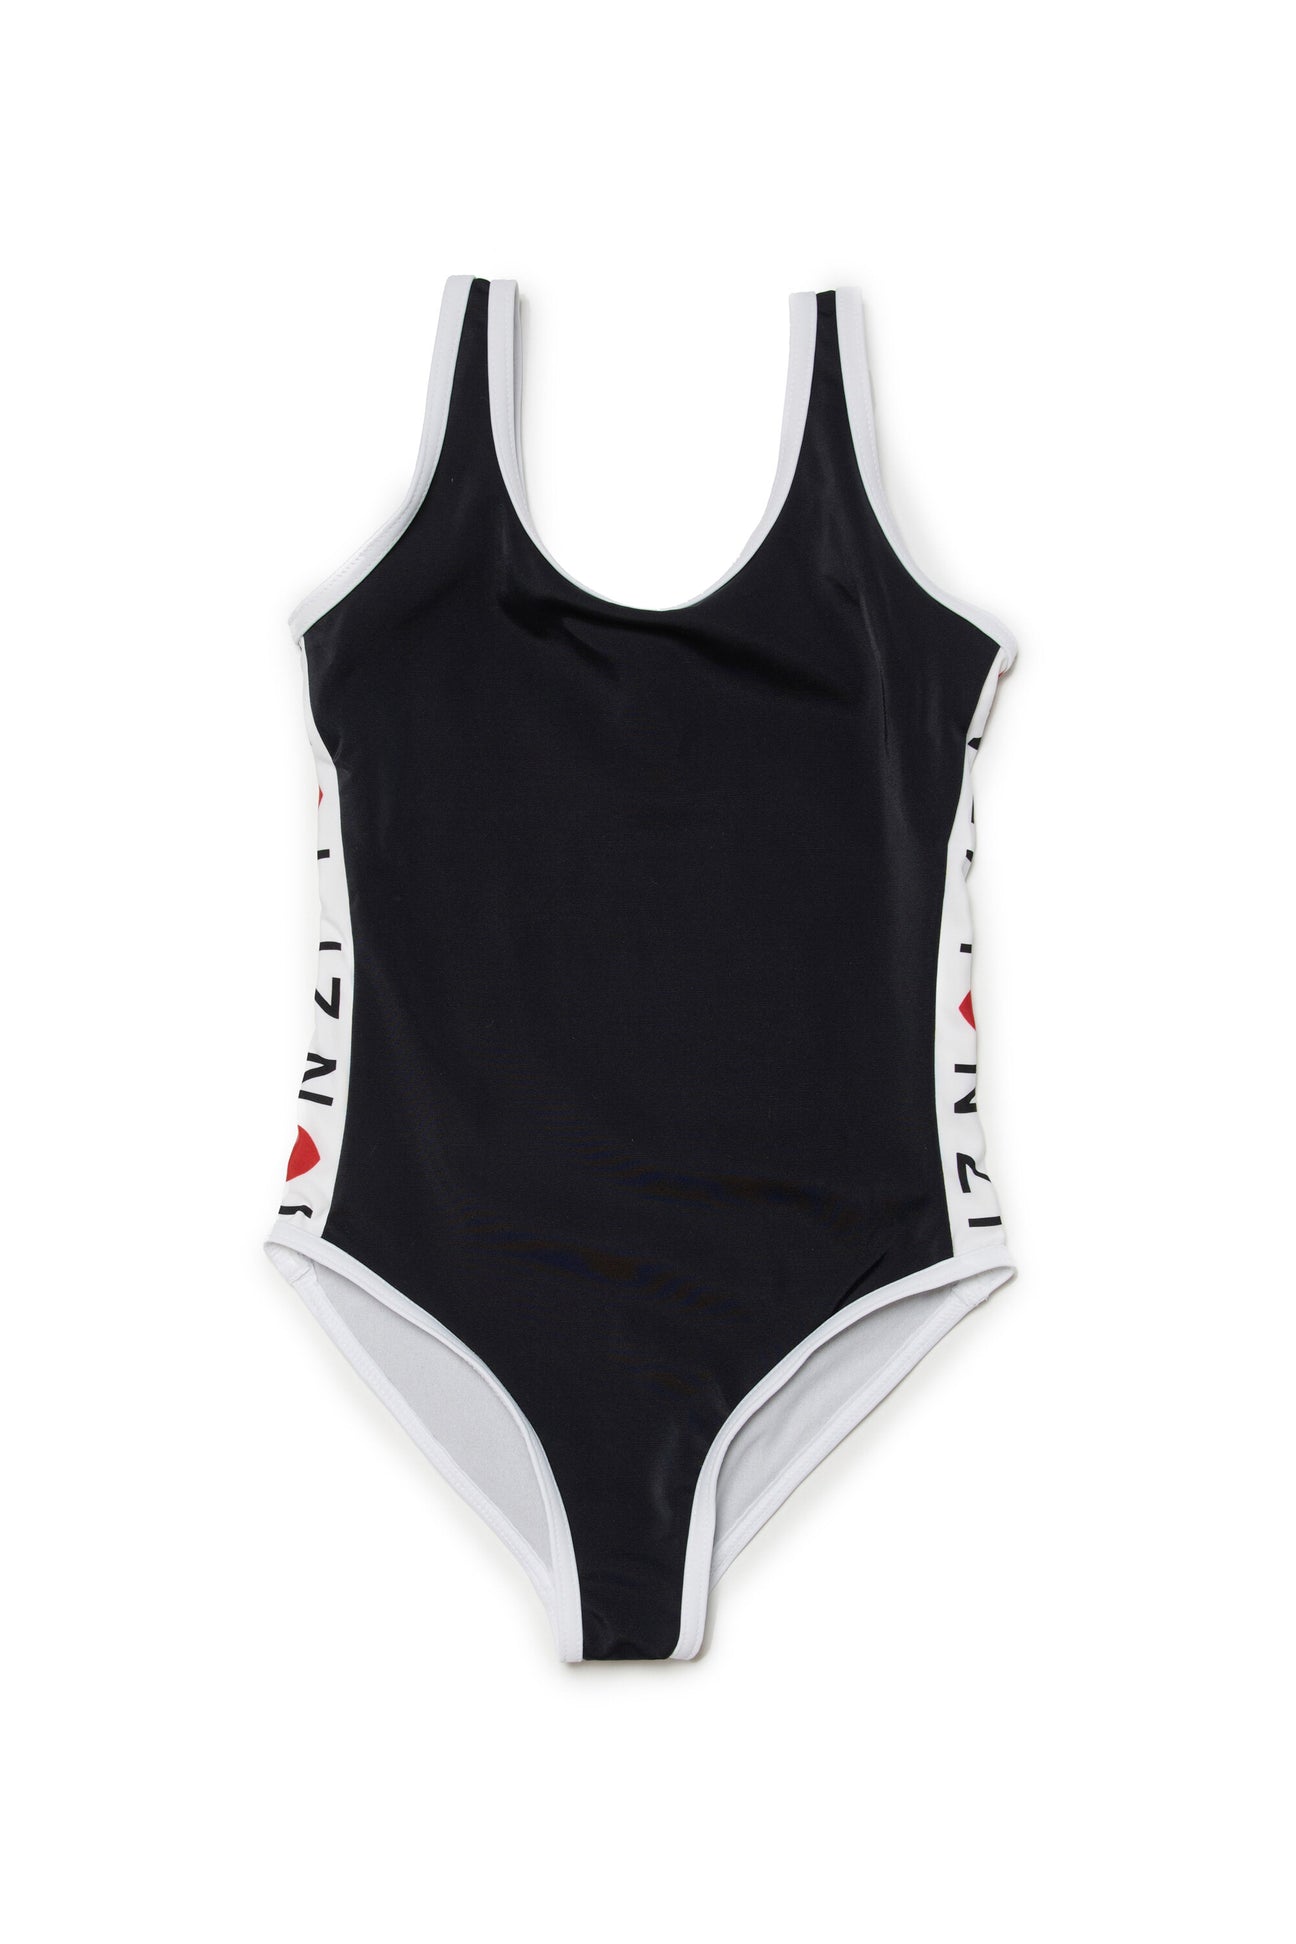 Lycra one-piece swimsuit branded with I Love N°21 logo 